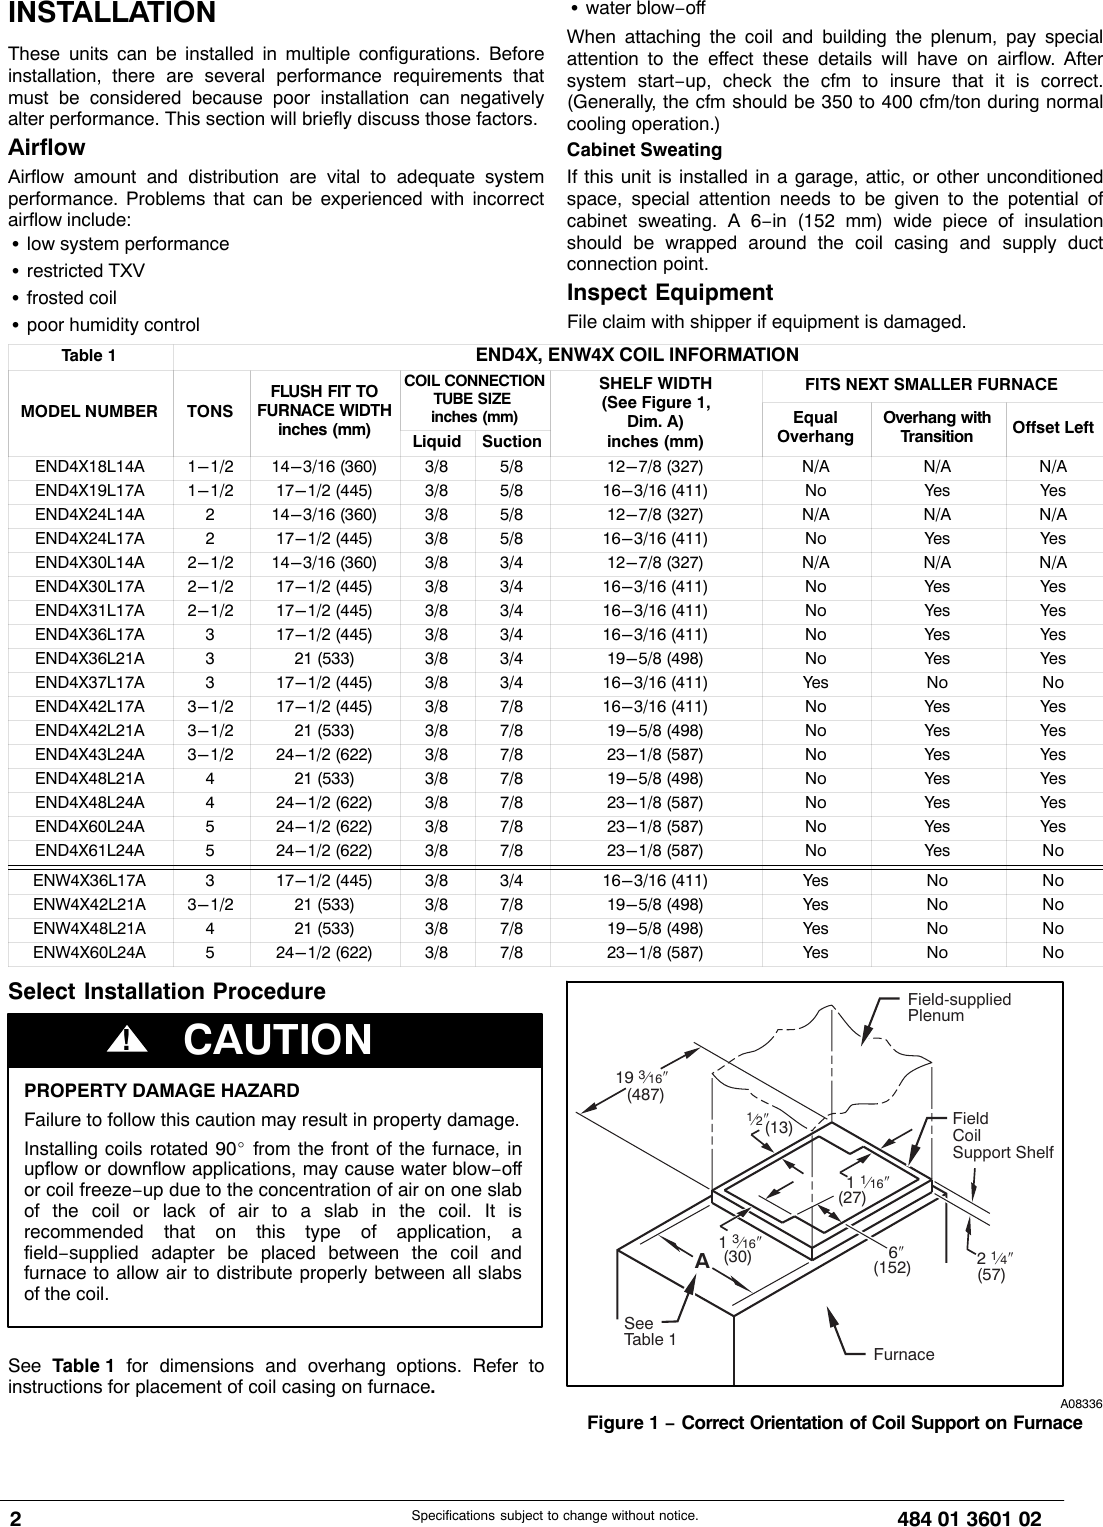 Page 2 of 6 - ICP END4X36L17A1 48401360102 User Manual  EVAPORATOR COILS - Manuals And Guides 1709106L